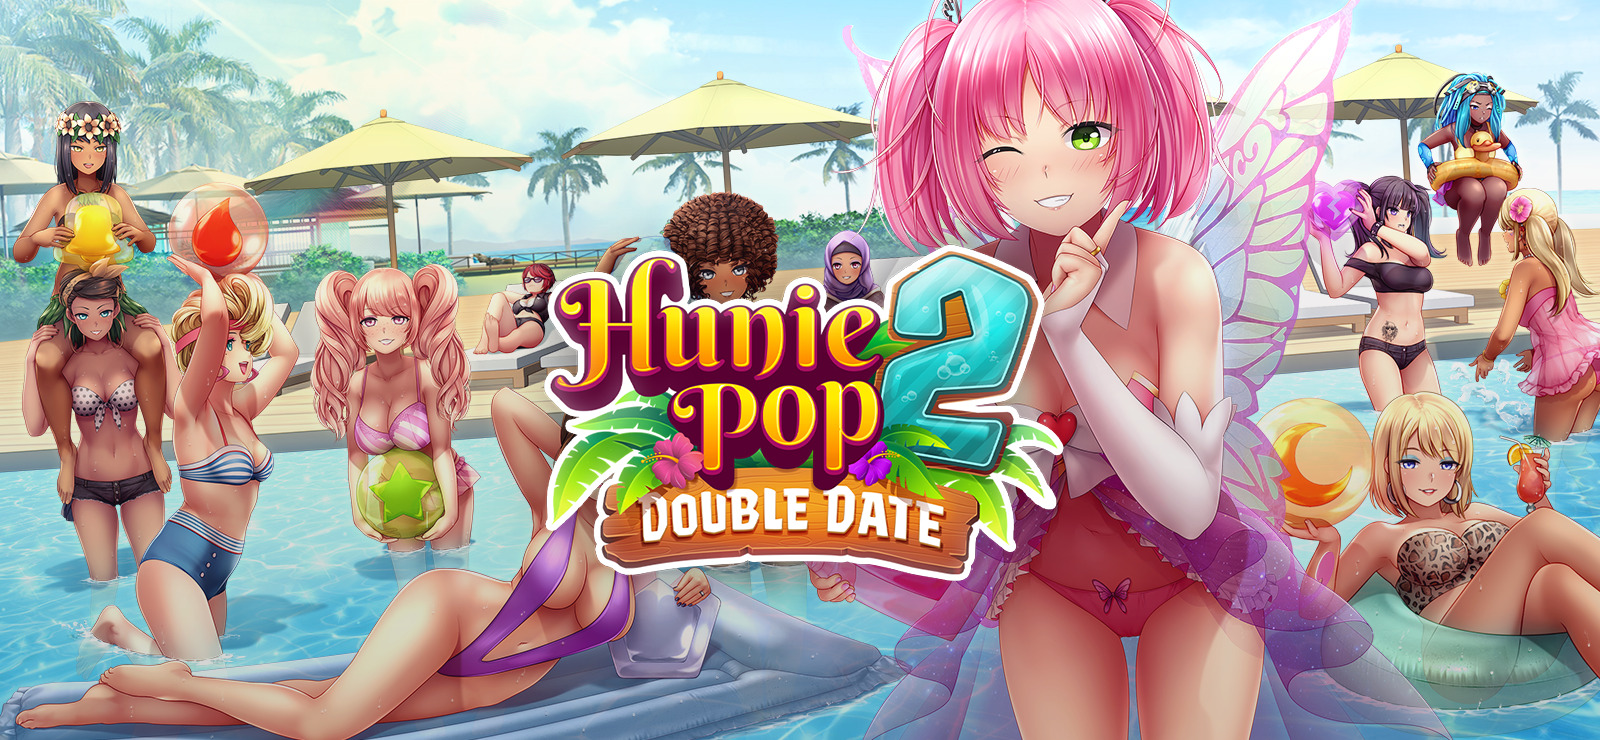 danna aguilar recommends huniepop videos without censor pic